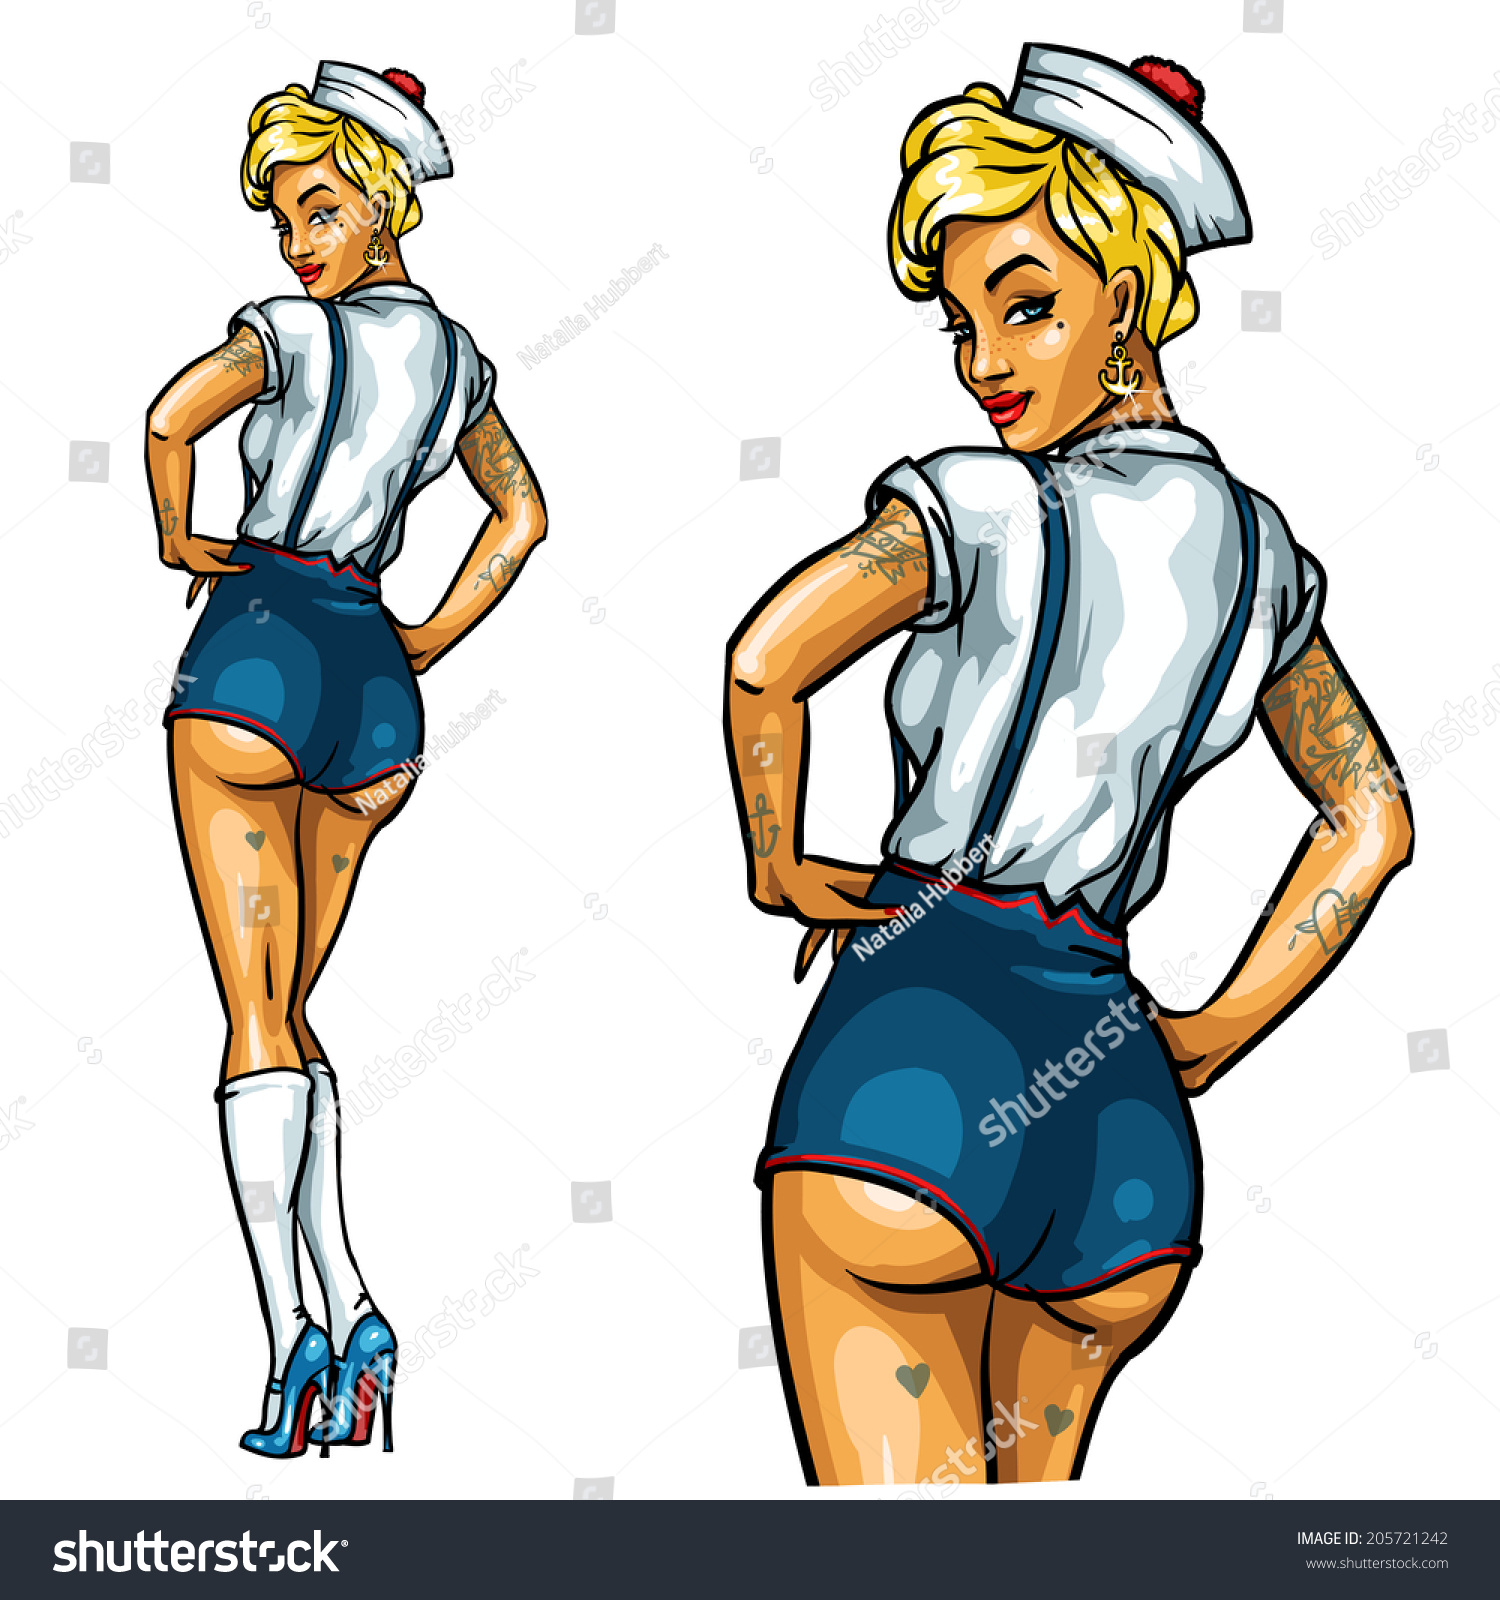 Sexy Pin Up Sailor Girl Isolated On White Stock Vector 205721242 Shutterstock 